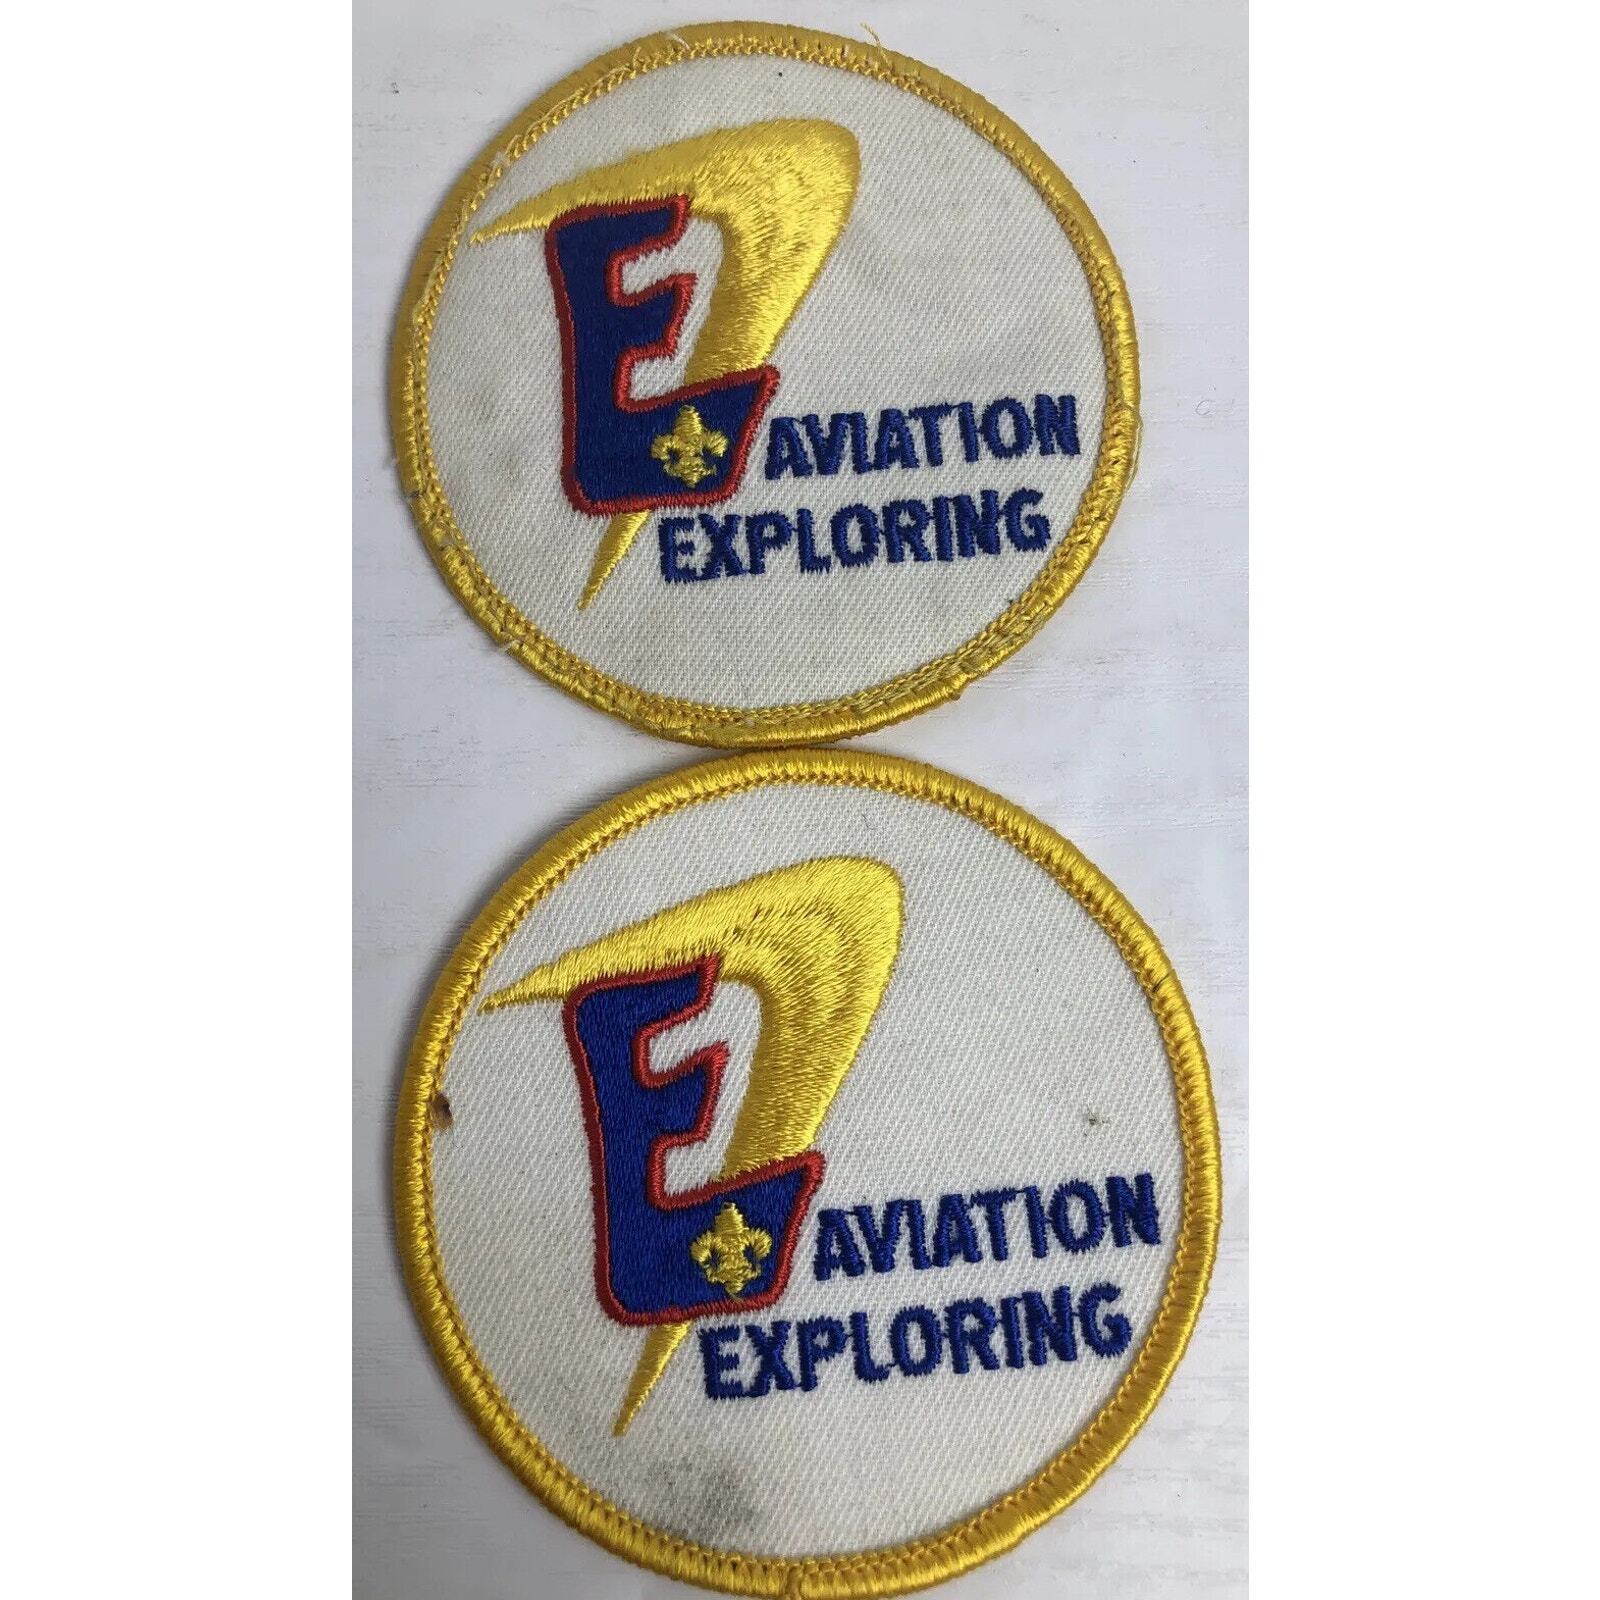 Boy Scouts Patches BSOA Aviation Exploring Two Gold Border 3 Inch x 3 Inch